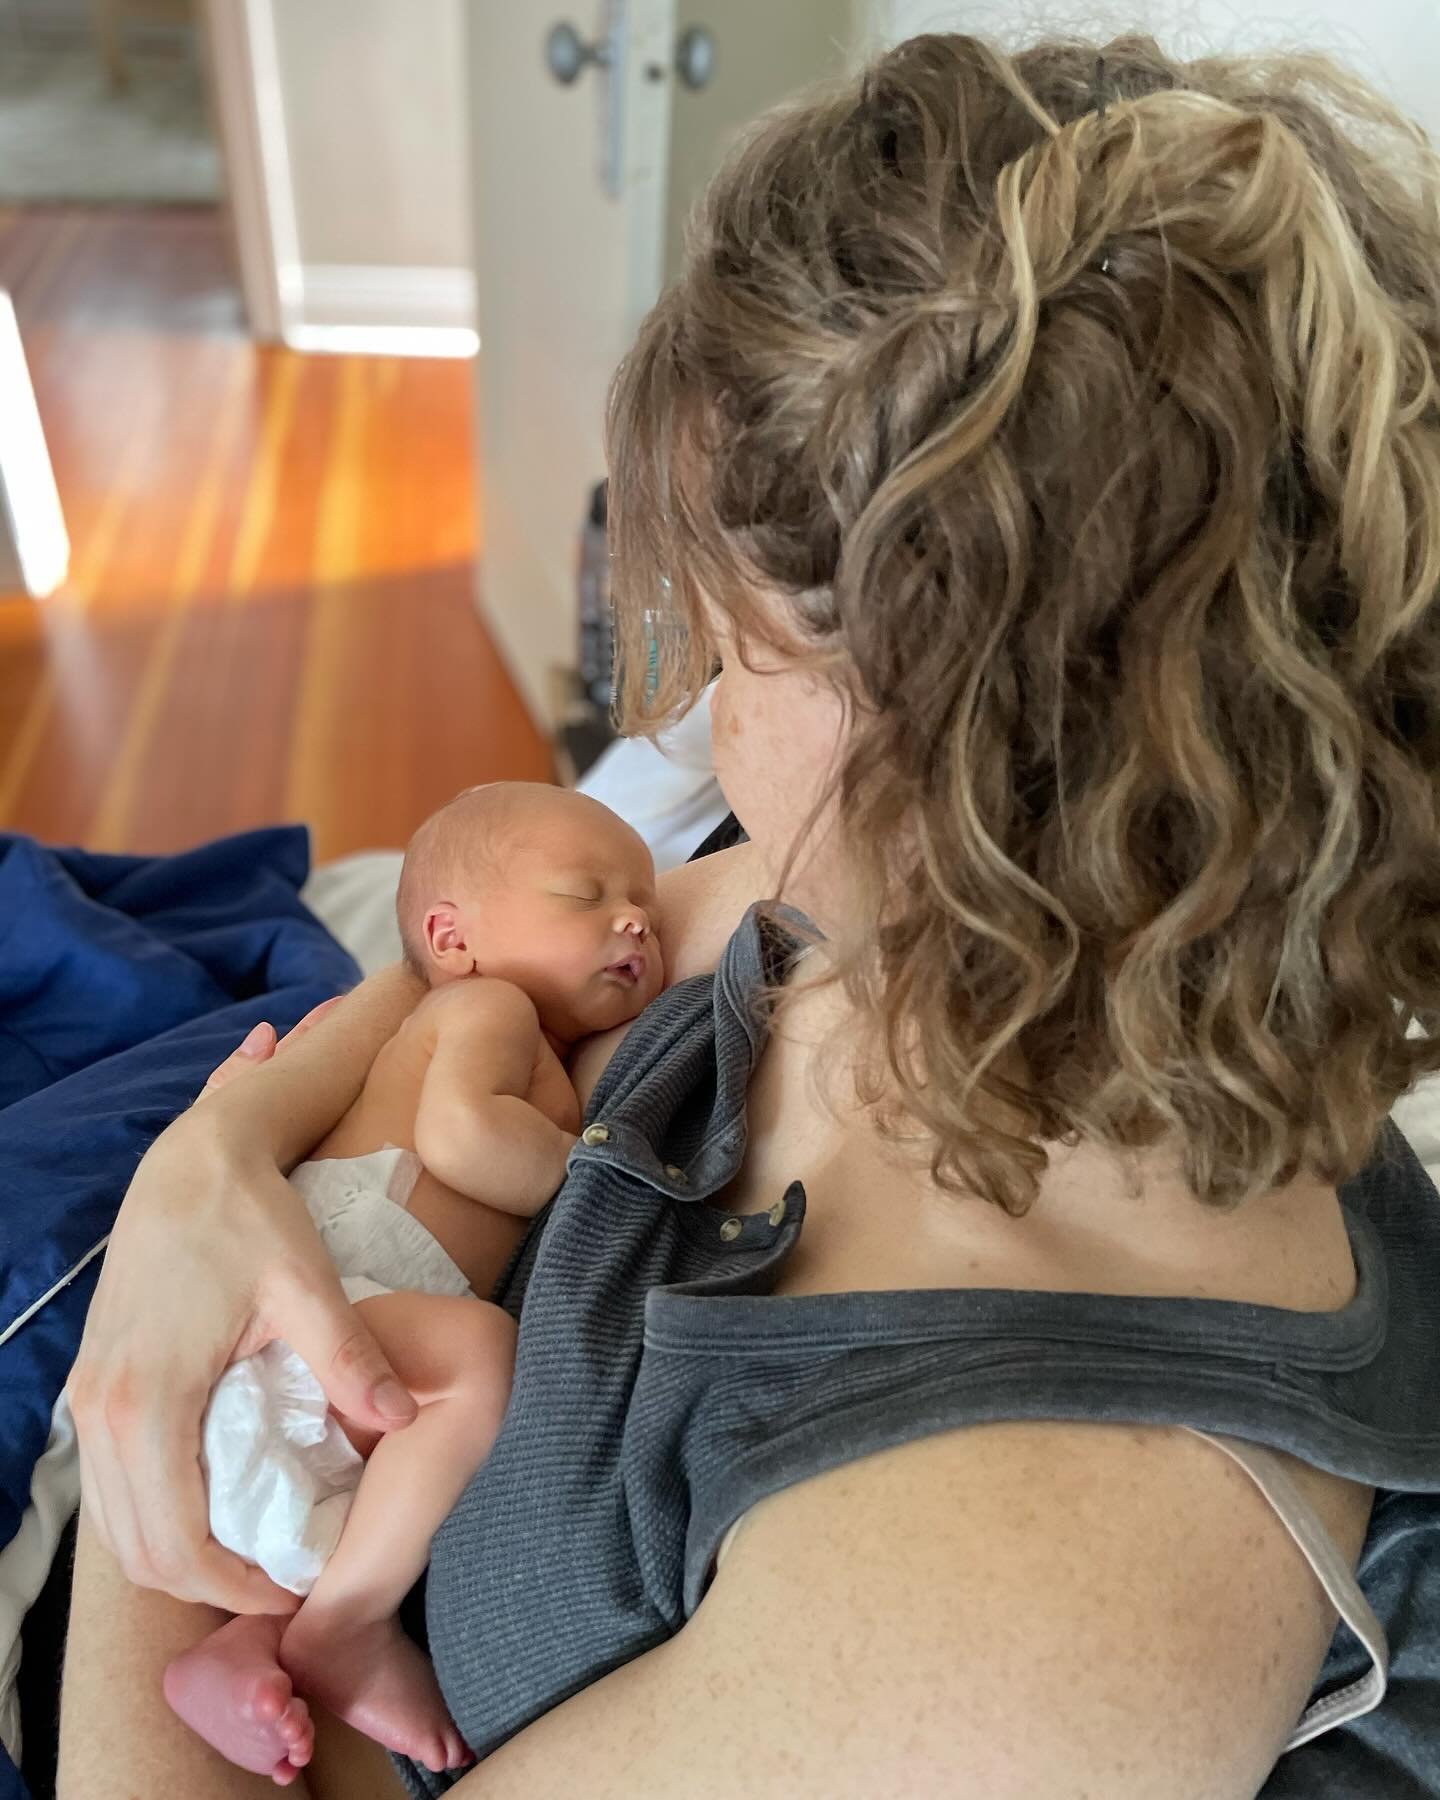 Did you feel prepared for postpartum?

Looking back, I can pretty confidently say that I did not. I was focused on the stuff that *I thought* would help me feel more prepared: the sleep swaddles, the room thermometer, the bottles, the stroller. Not w